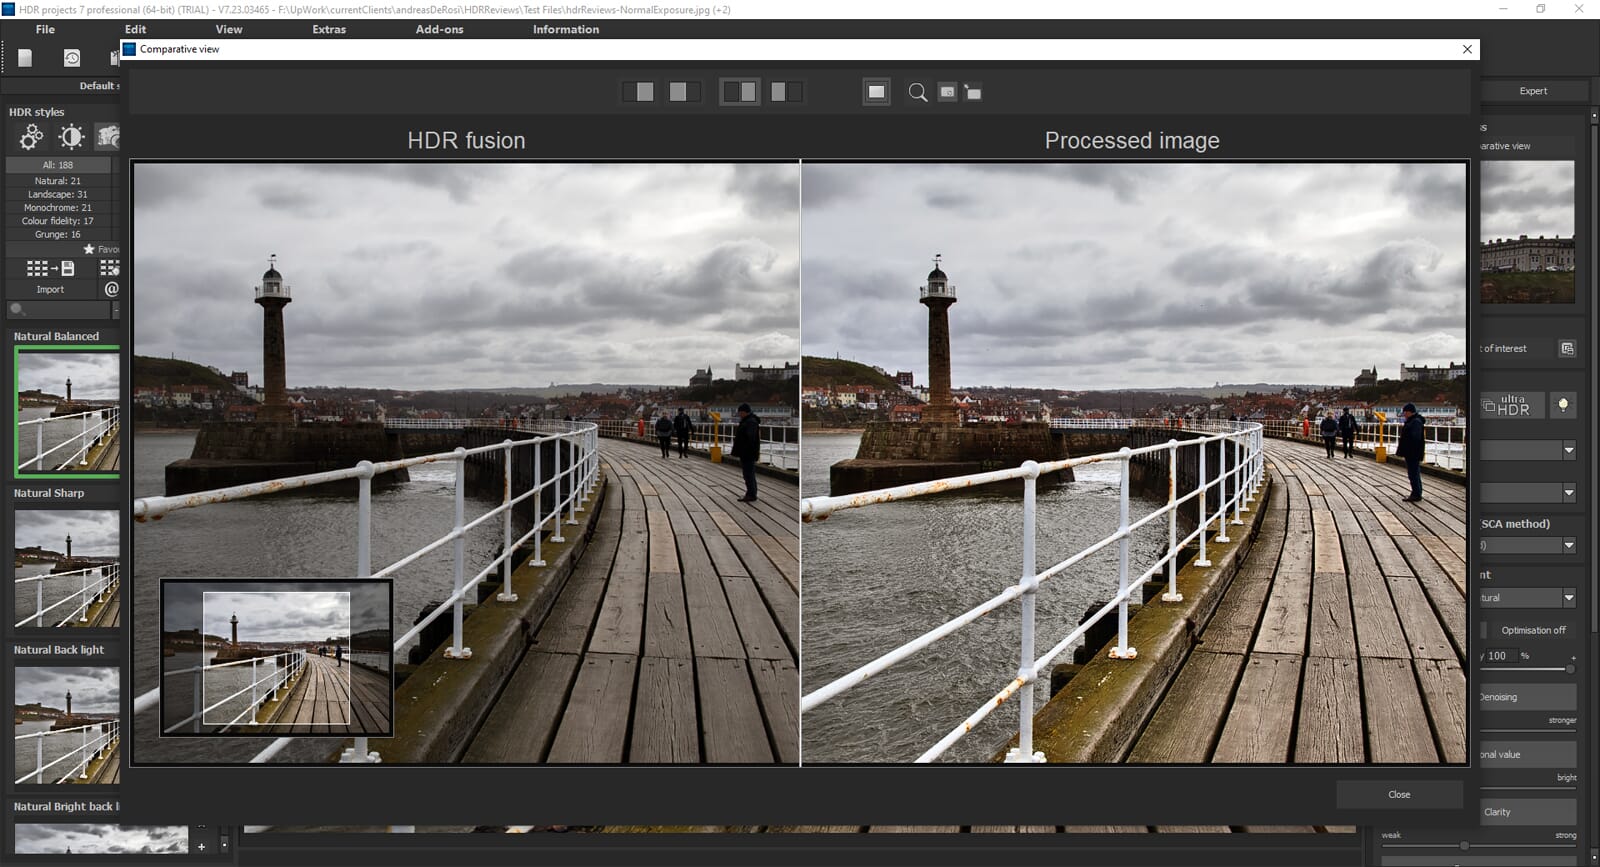 hdr projects 3 standard review